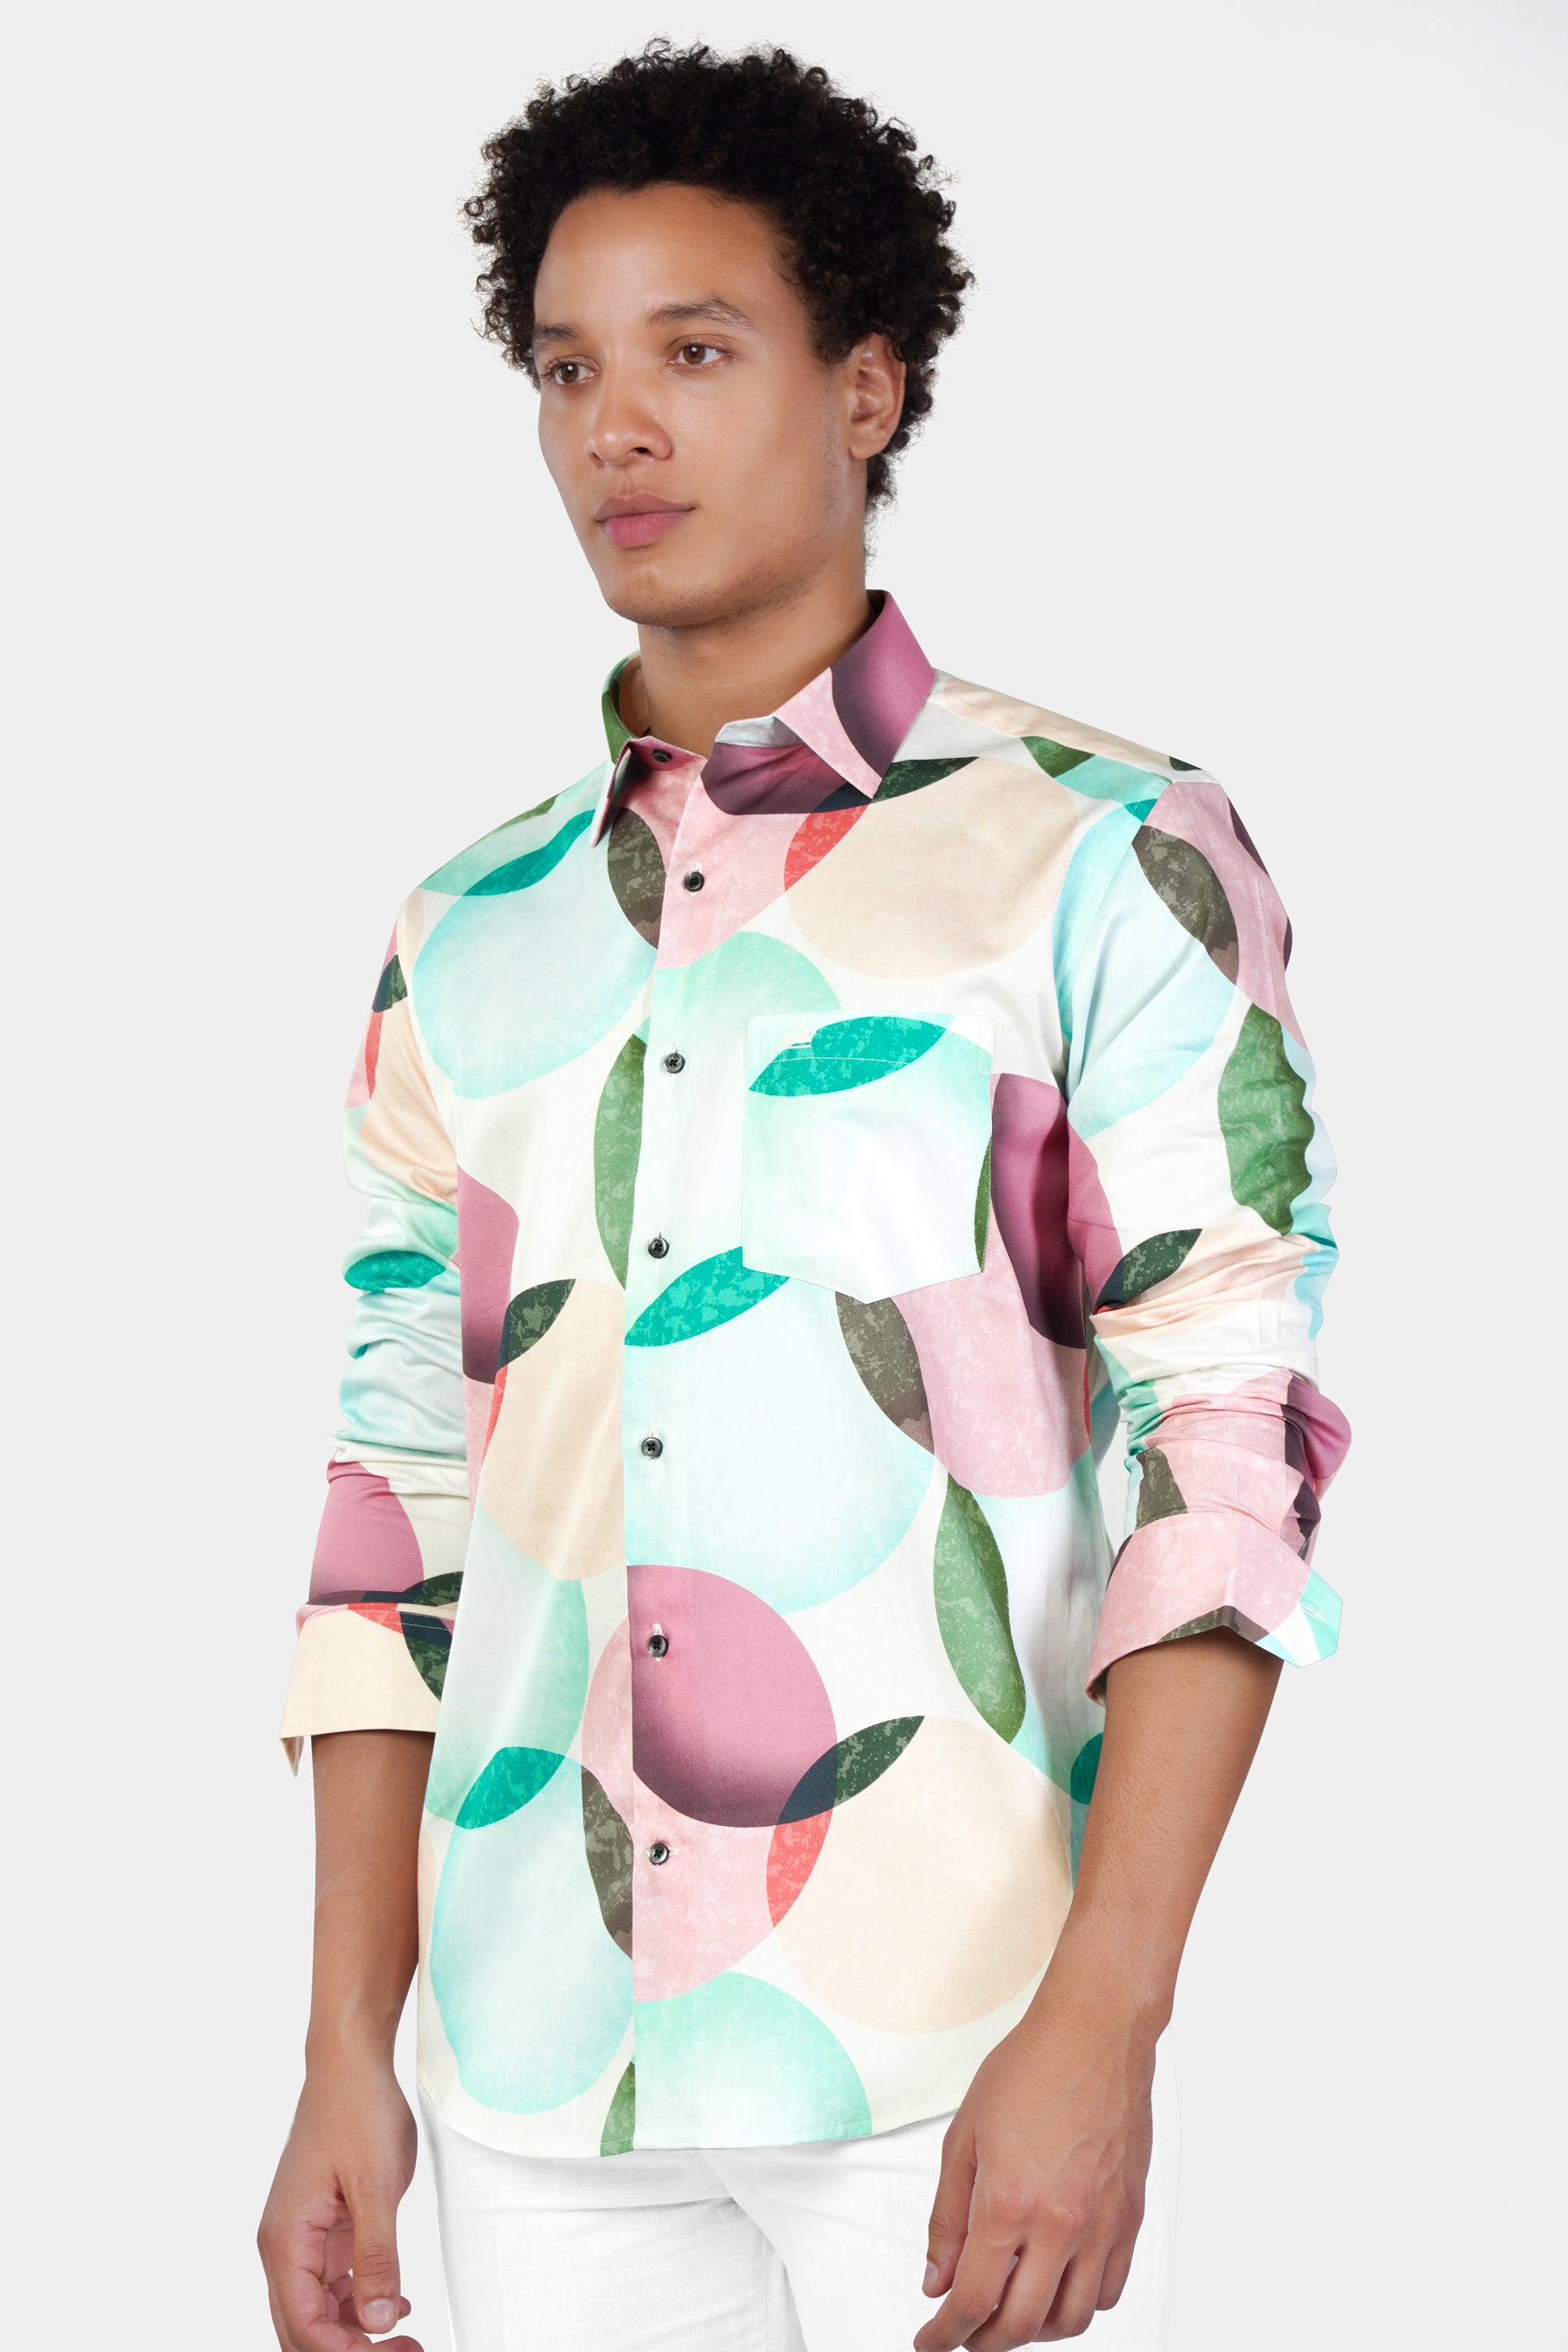 Bright White with Pastel Pink and Edgewater Green Abstract Printed Subtle Sheen Super Soft Premium Cotton Designer Shirt 12042-BLK-38, 12042-BLK-H-38, 12042-BLK-39, 12042-BLK-H-39, 12042-BLK-40, 12042-BLK-H-40, 12042-BLK-42, 12042-BLK-H-42, 12042-BLK-44, 12042-BLK-H-44, 12042-BLK-46, 12042-BLK-H-46, 12042-BLK-48, 12042-BLK-H-48, 12042-BLK-50, 12042-BLK-H-50, 12042-BLK-52, 12042-BLK-H-52